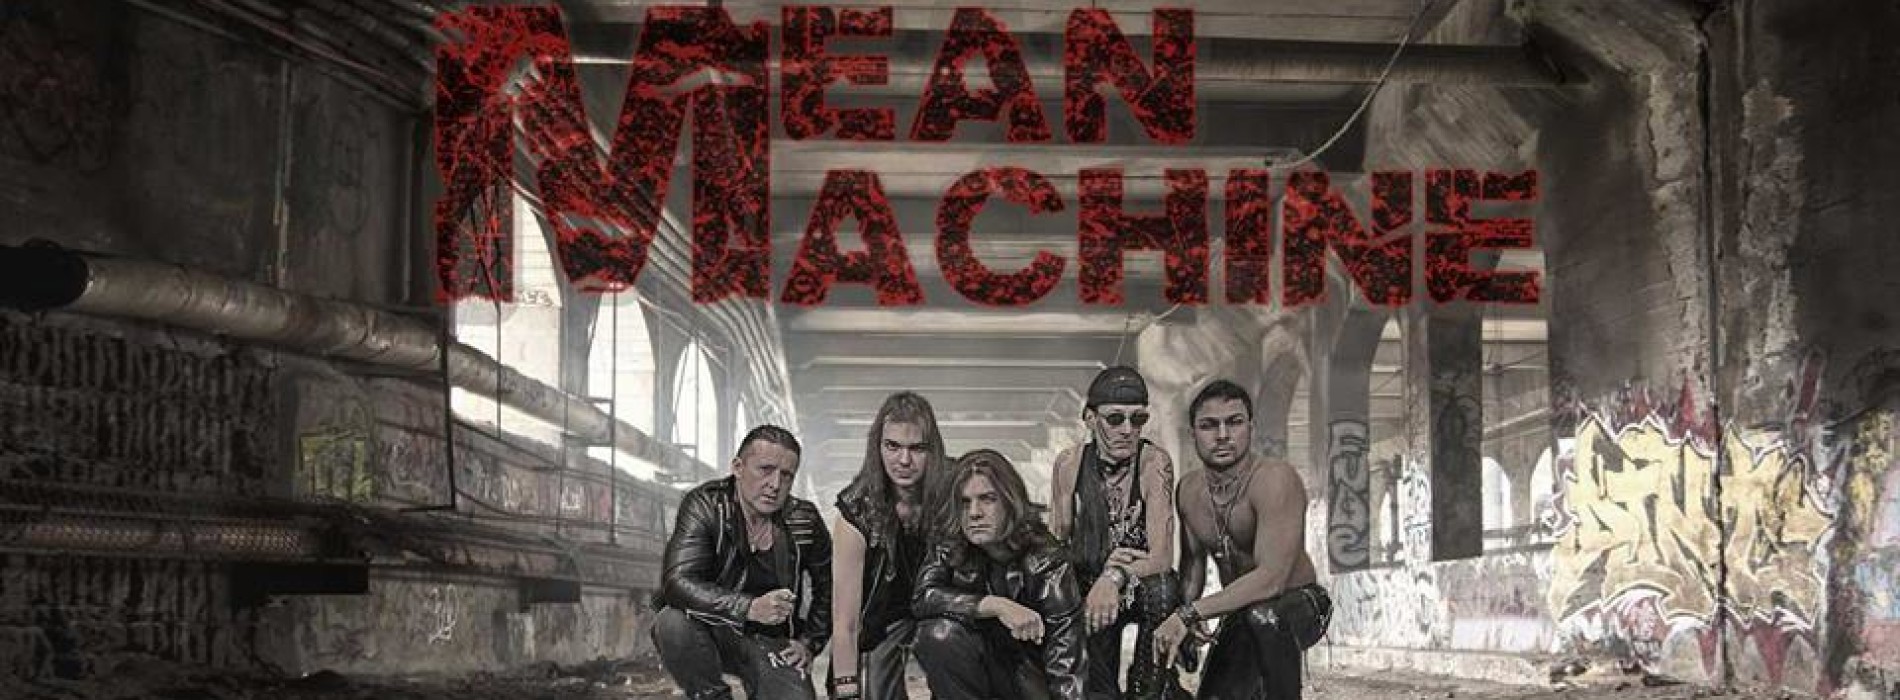 Mean Machine – “Into The Night” (Official Music Video)